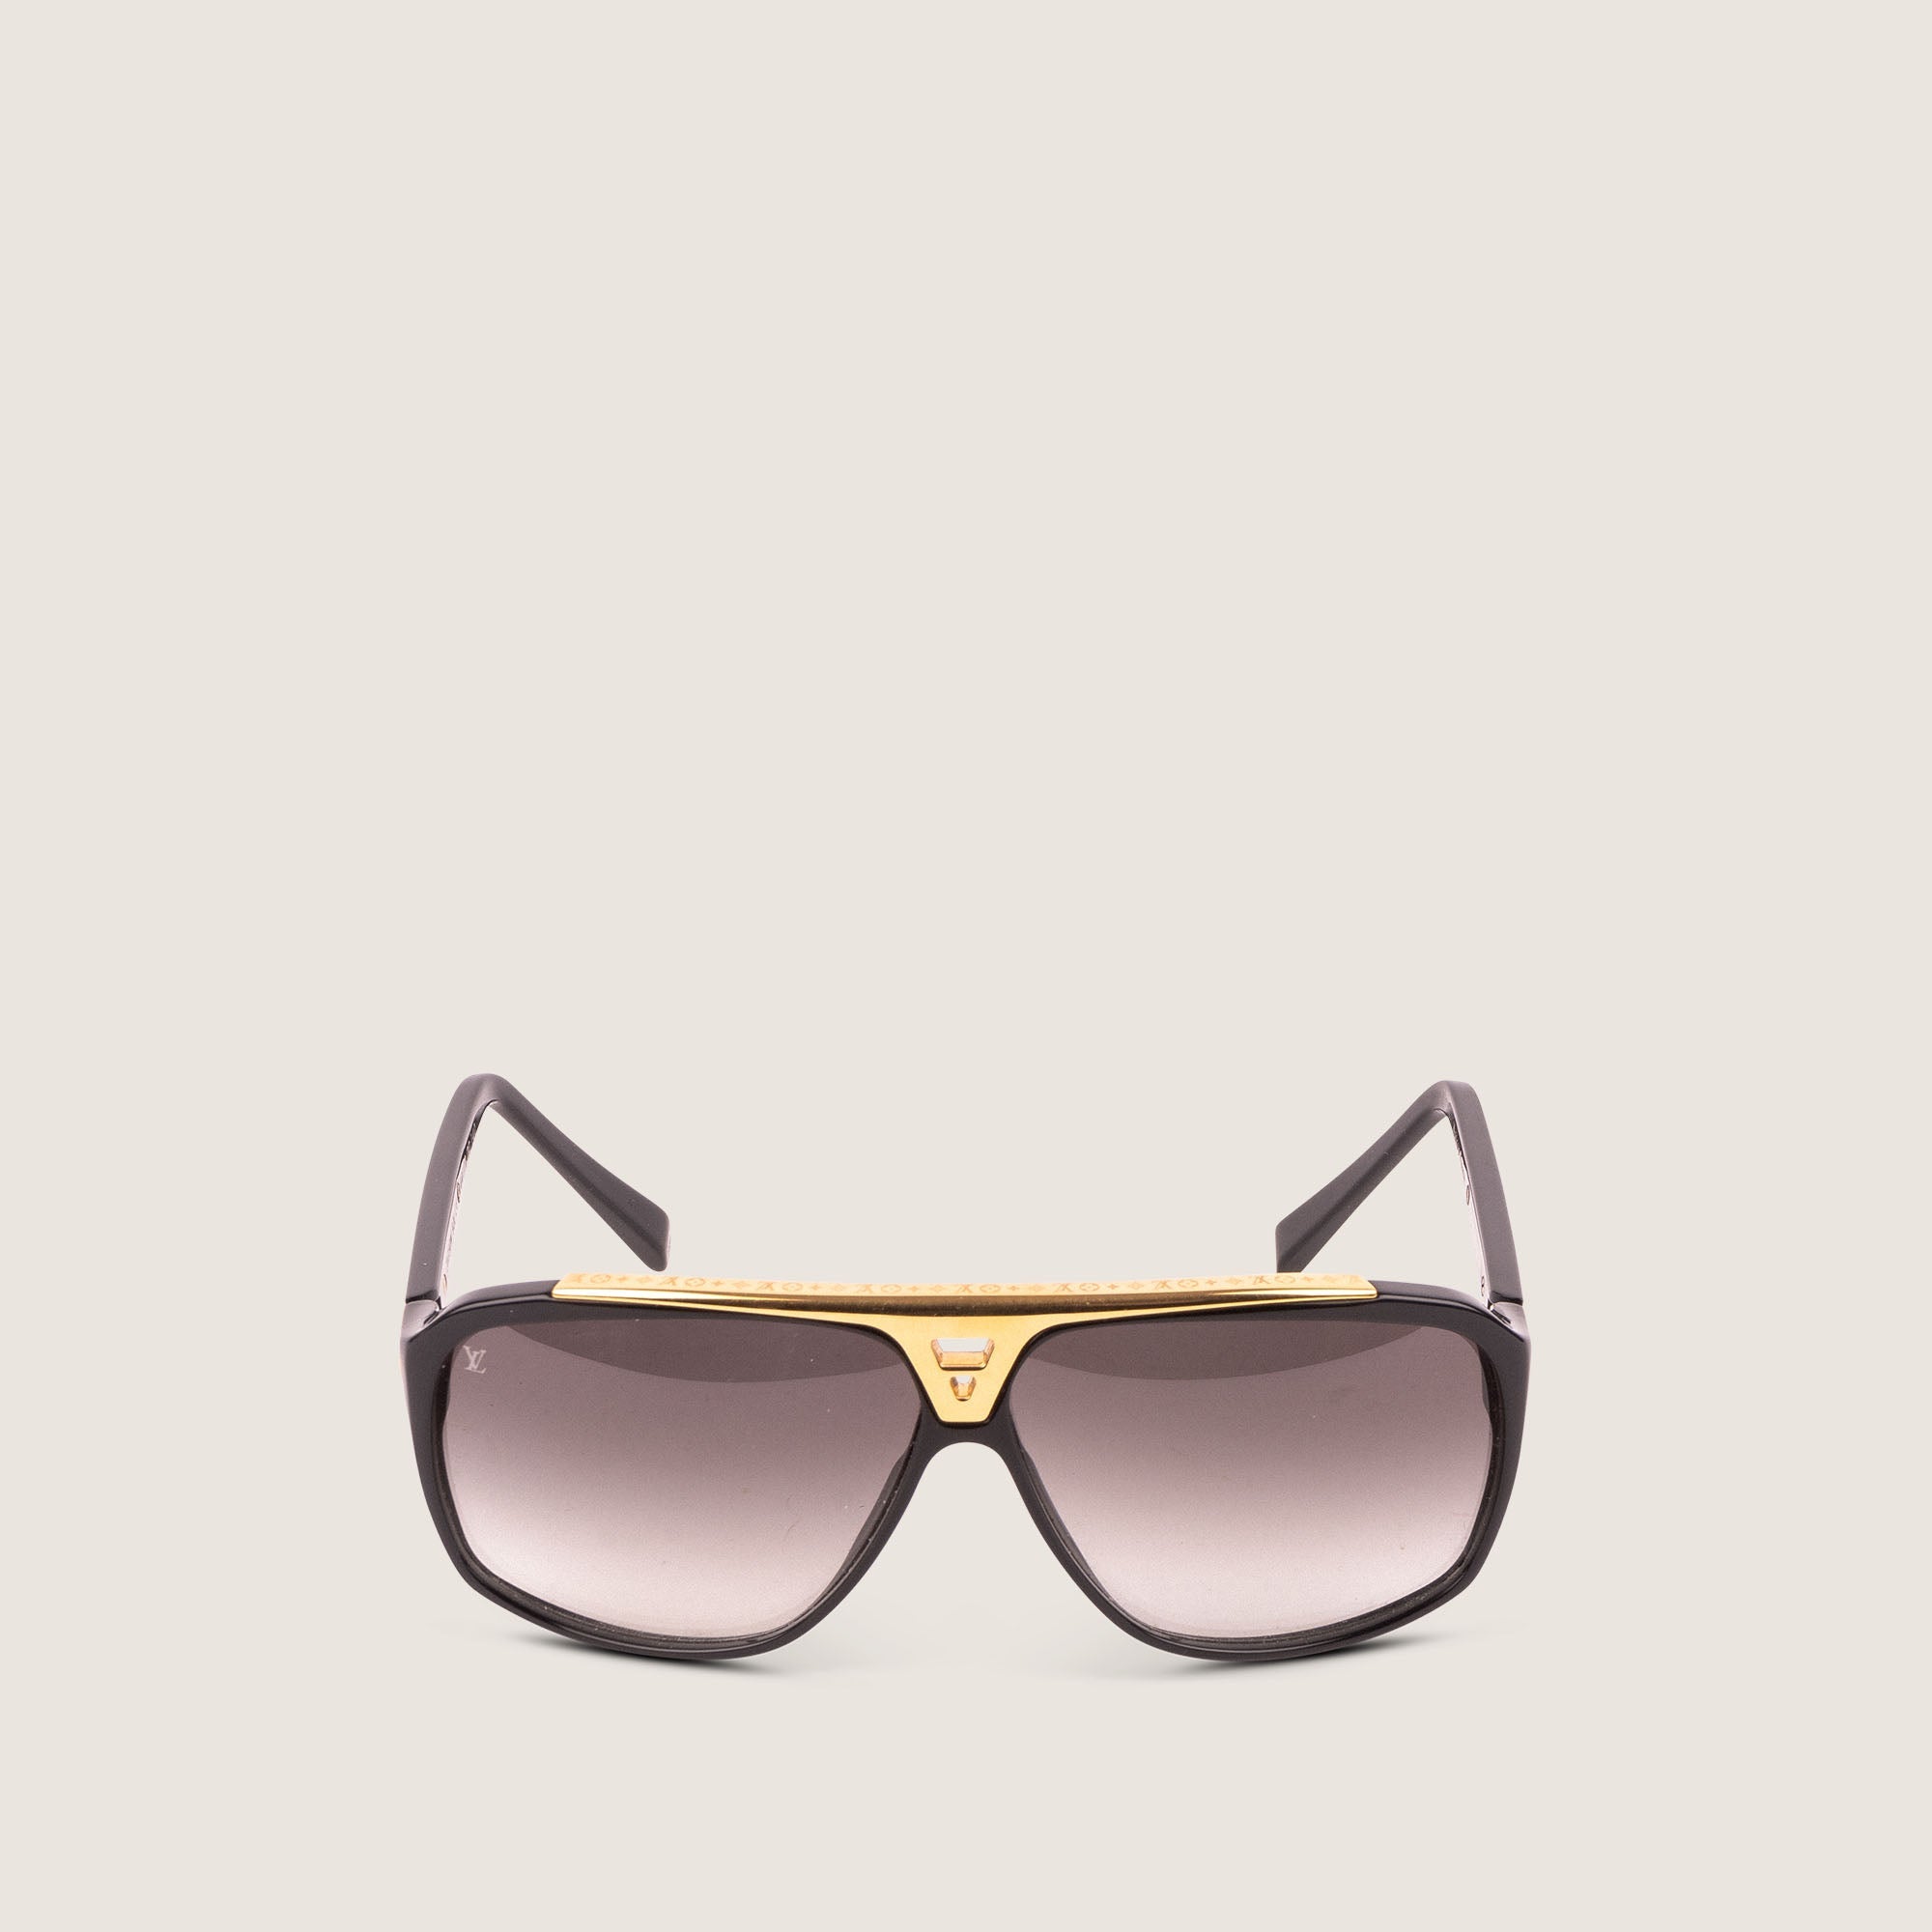 Evidence Sunglasses - LOUIS VUITTON - Affordable Luxury image